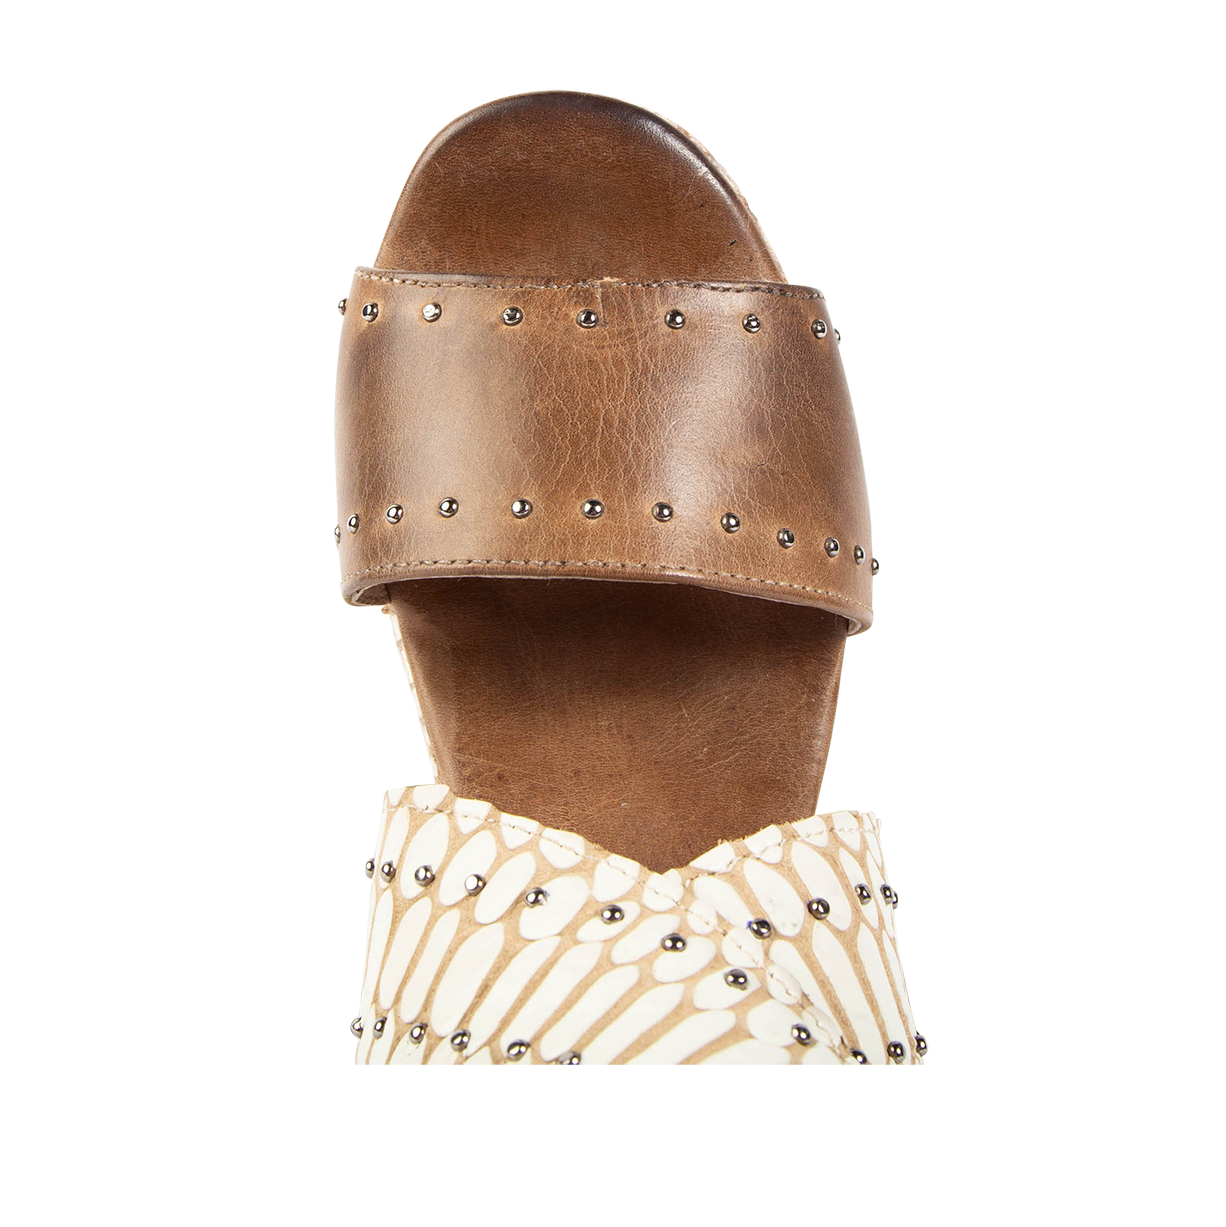 Top view showing toe strap with stud detailing on FREEBIRD women's Terra white snake multi platform sandal with stud detailing